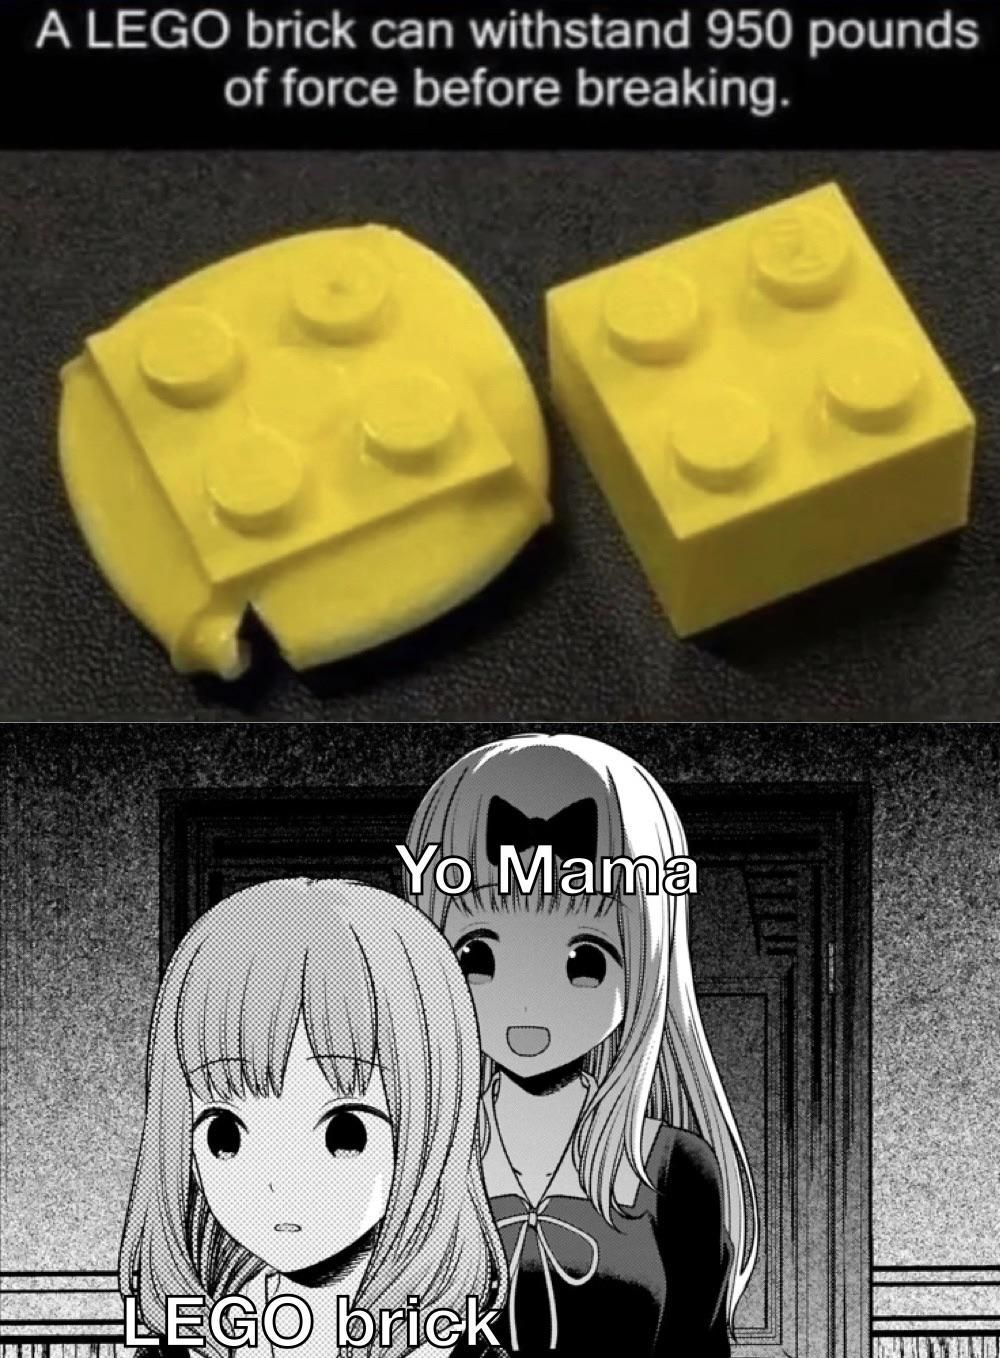 The LEGO company fears her